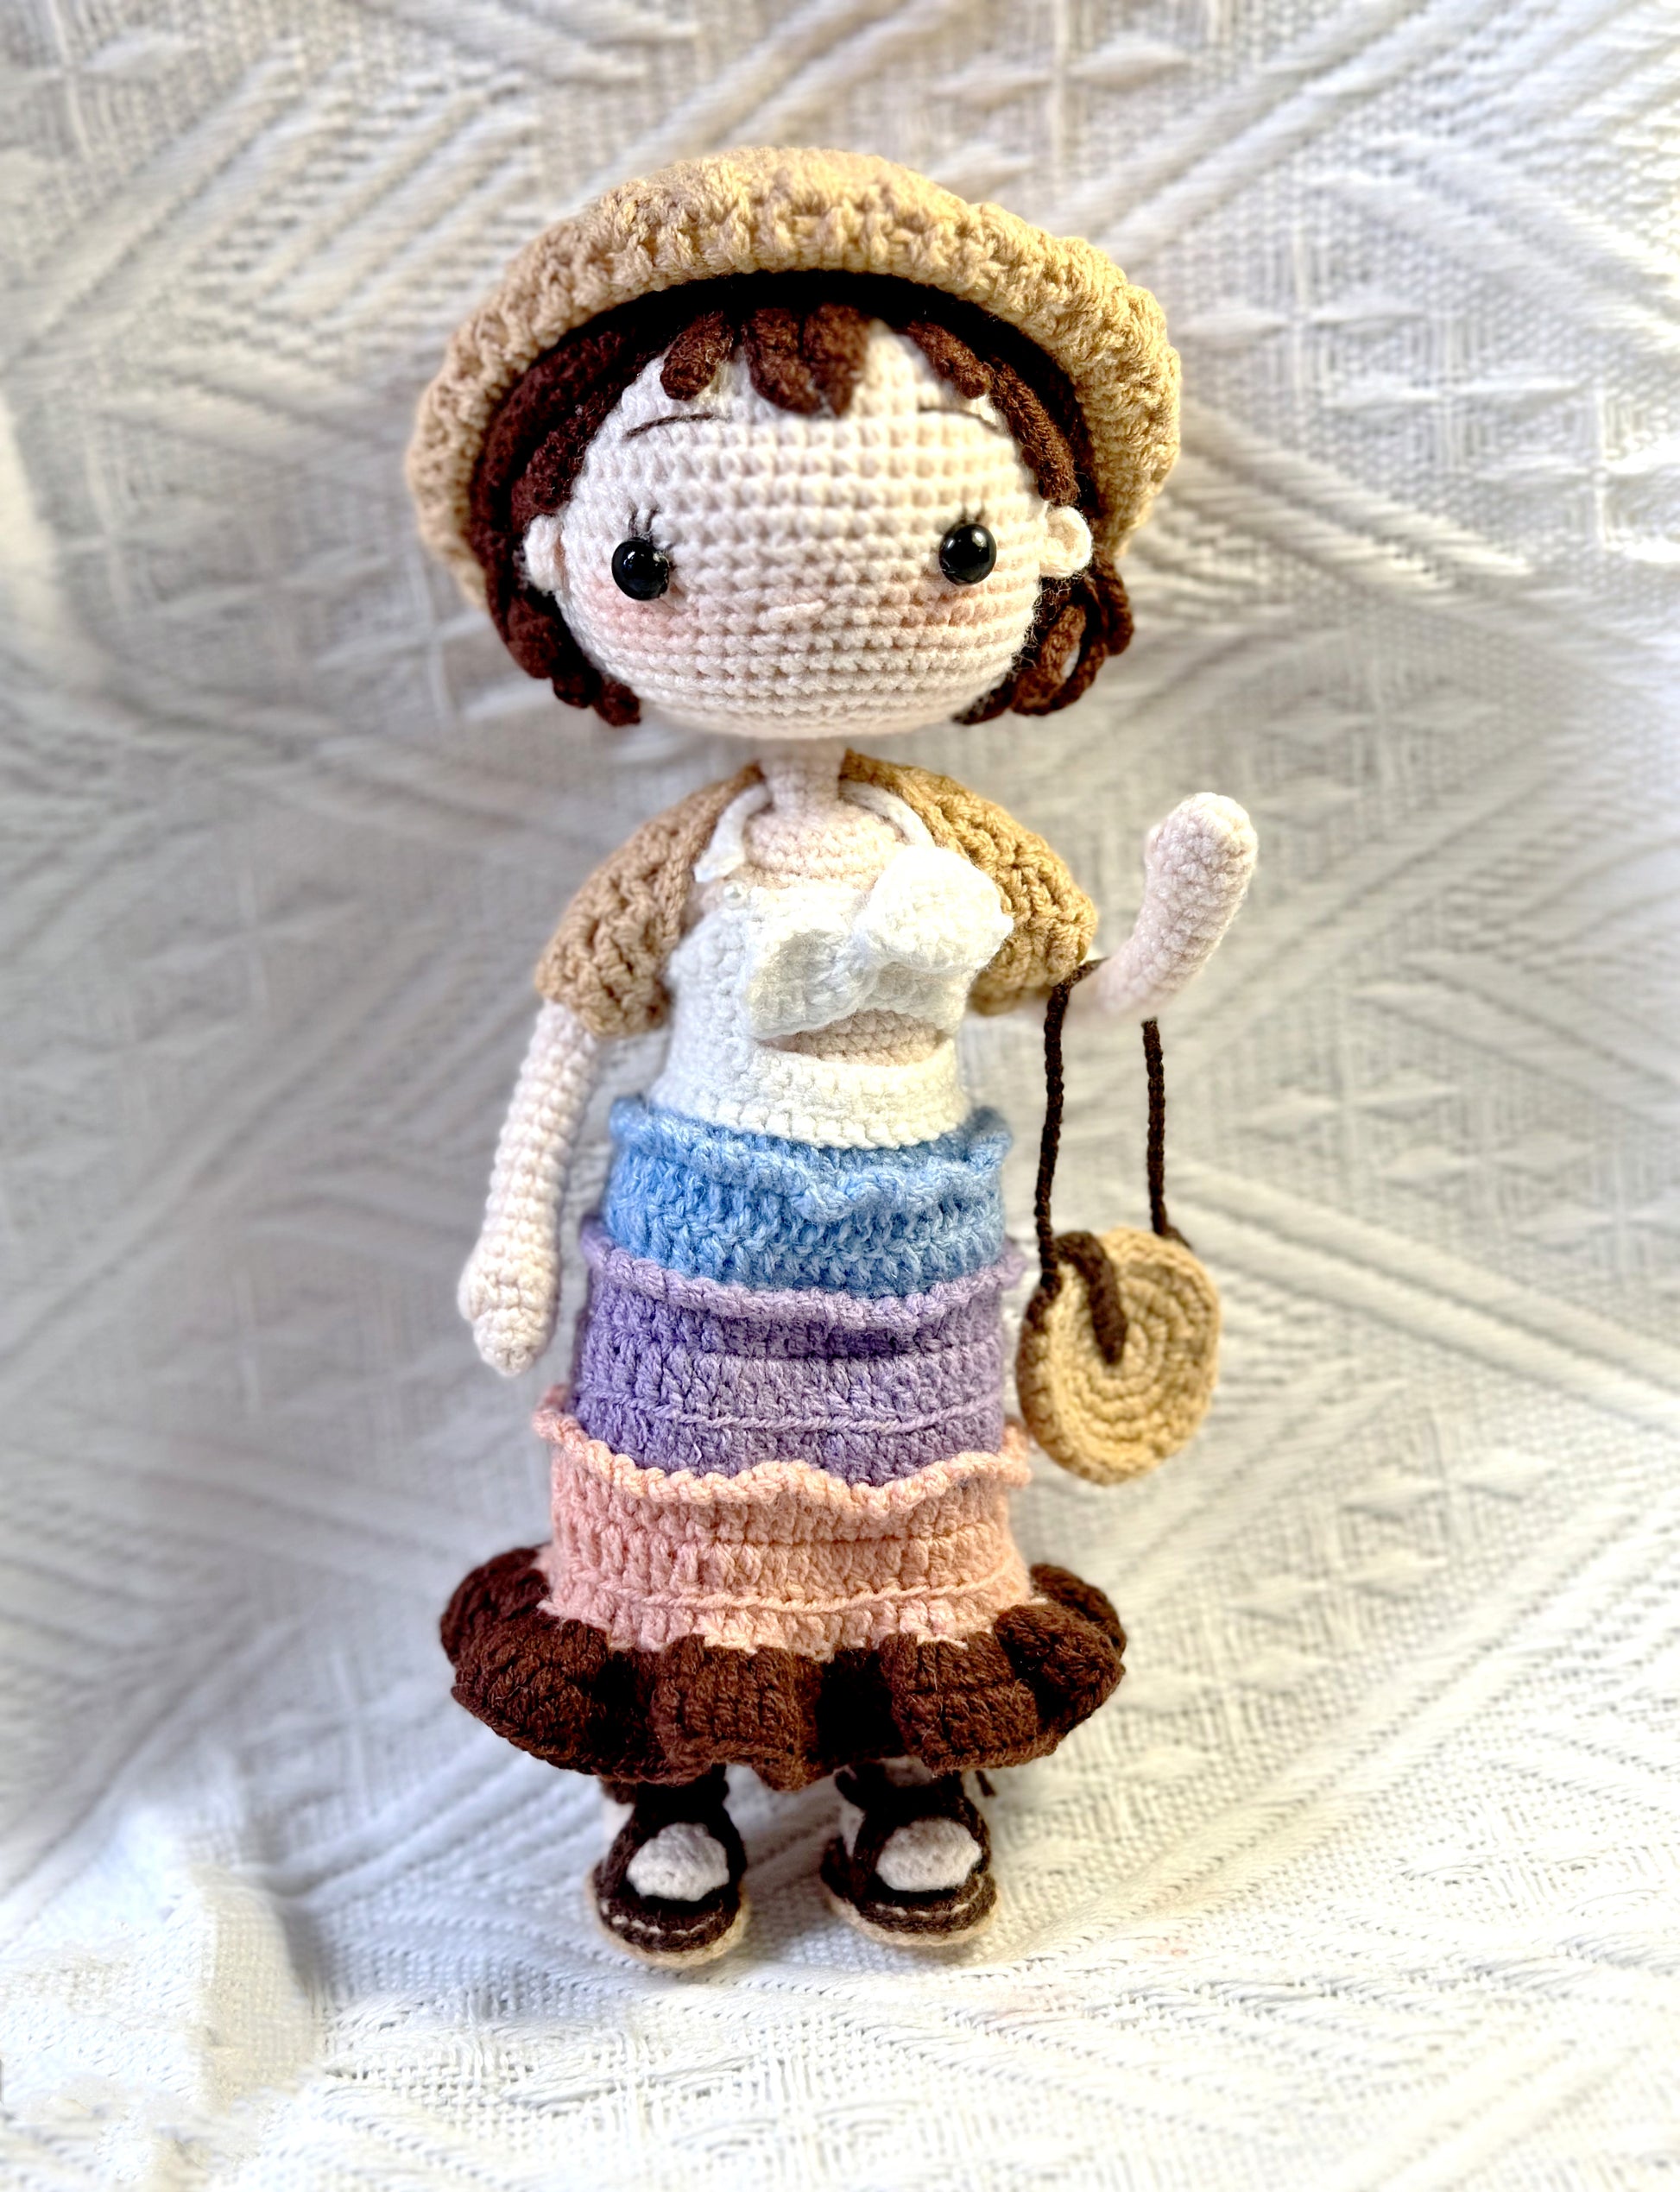 Personalized crochet doll gifts for birthdays and holidays